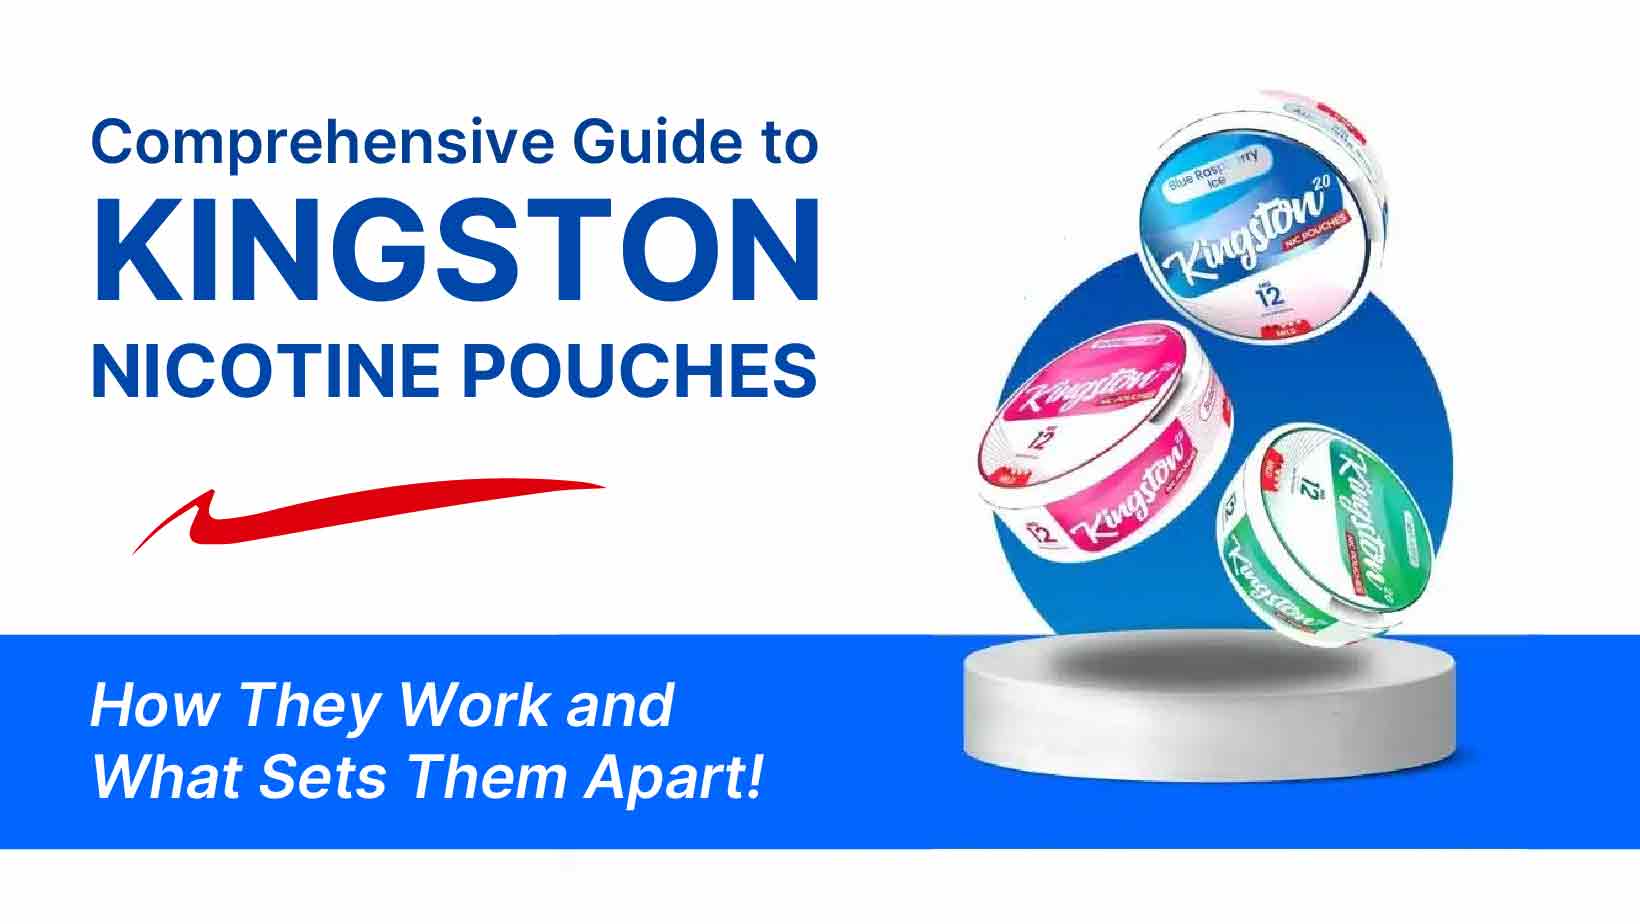 A Comprehensive Guide to Kingston Nicotine Pouches